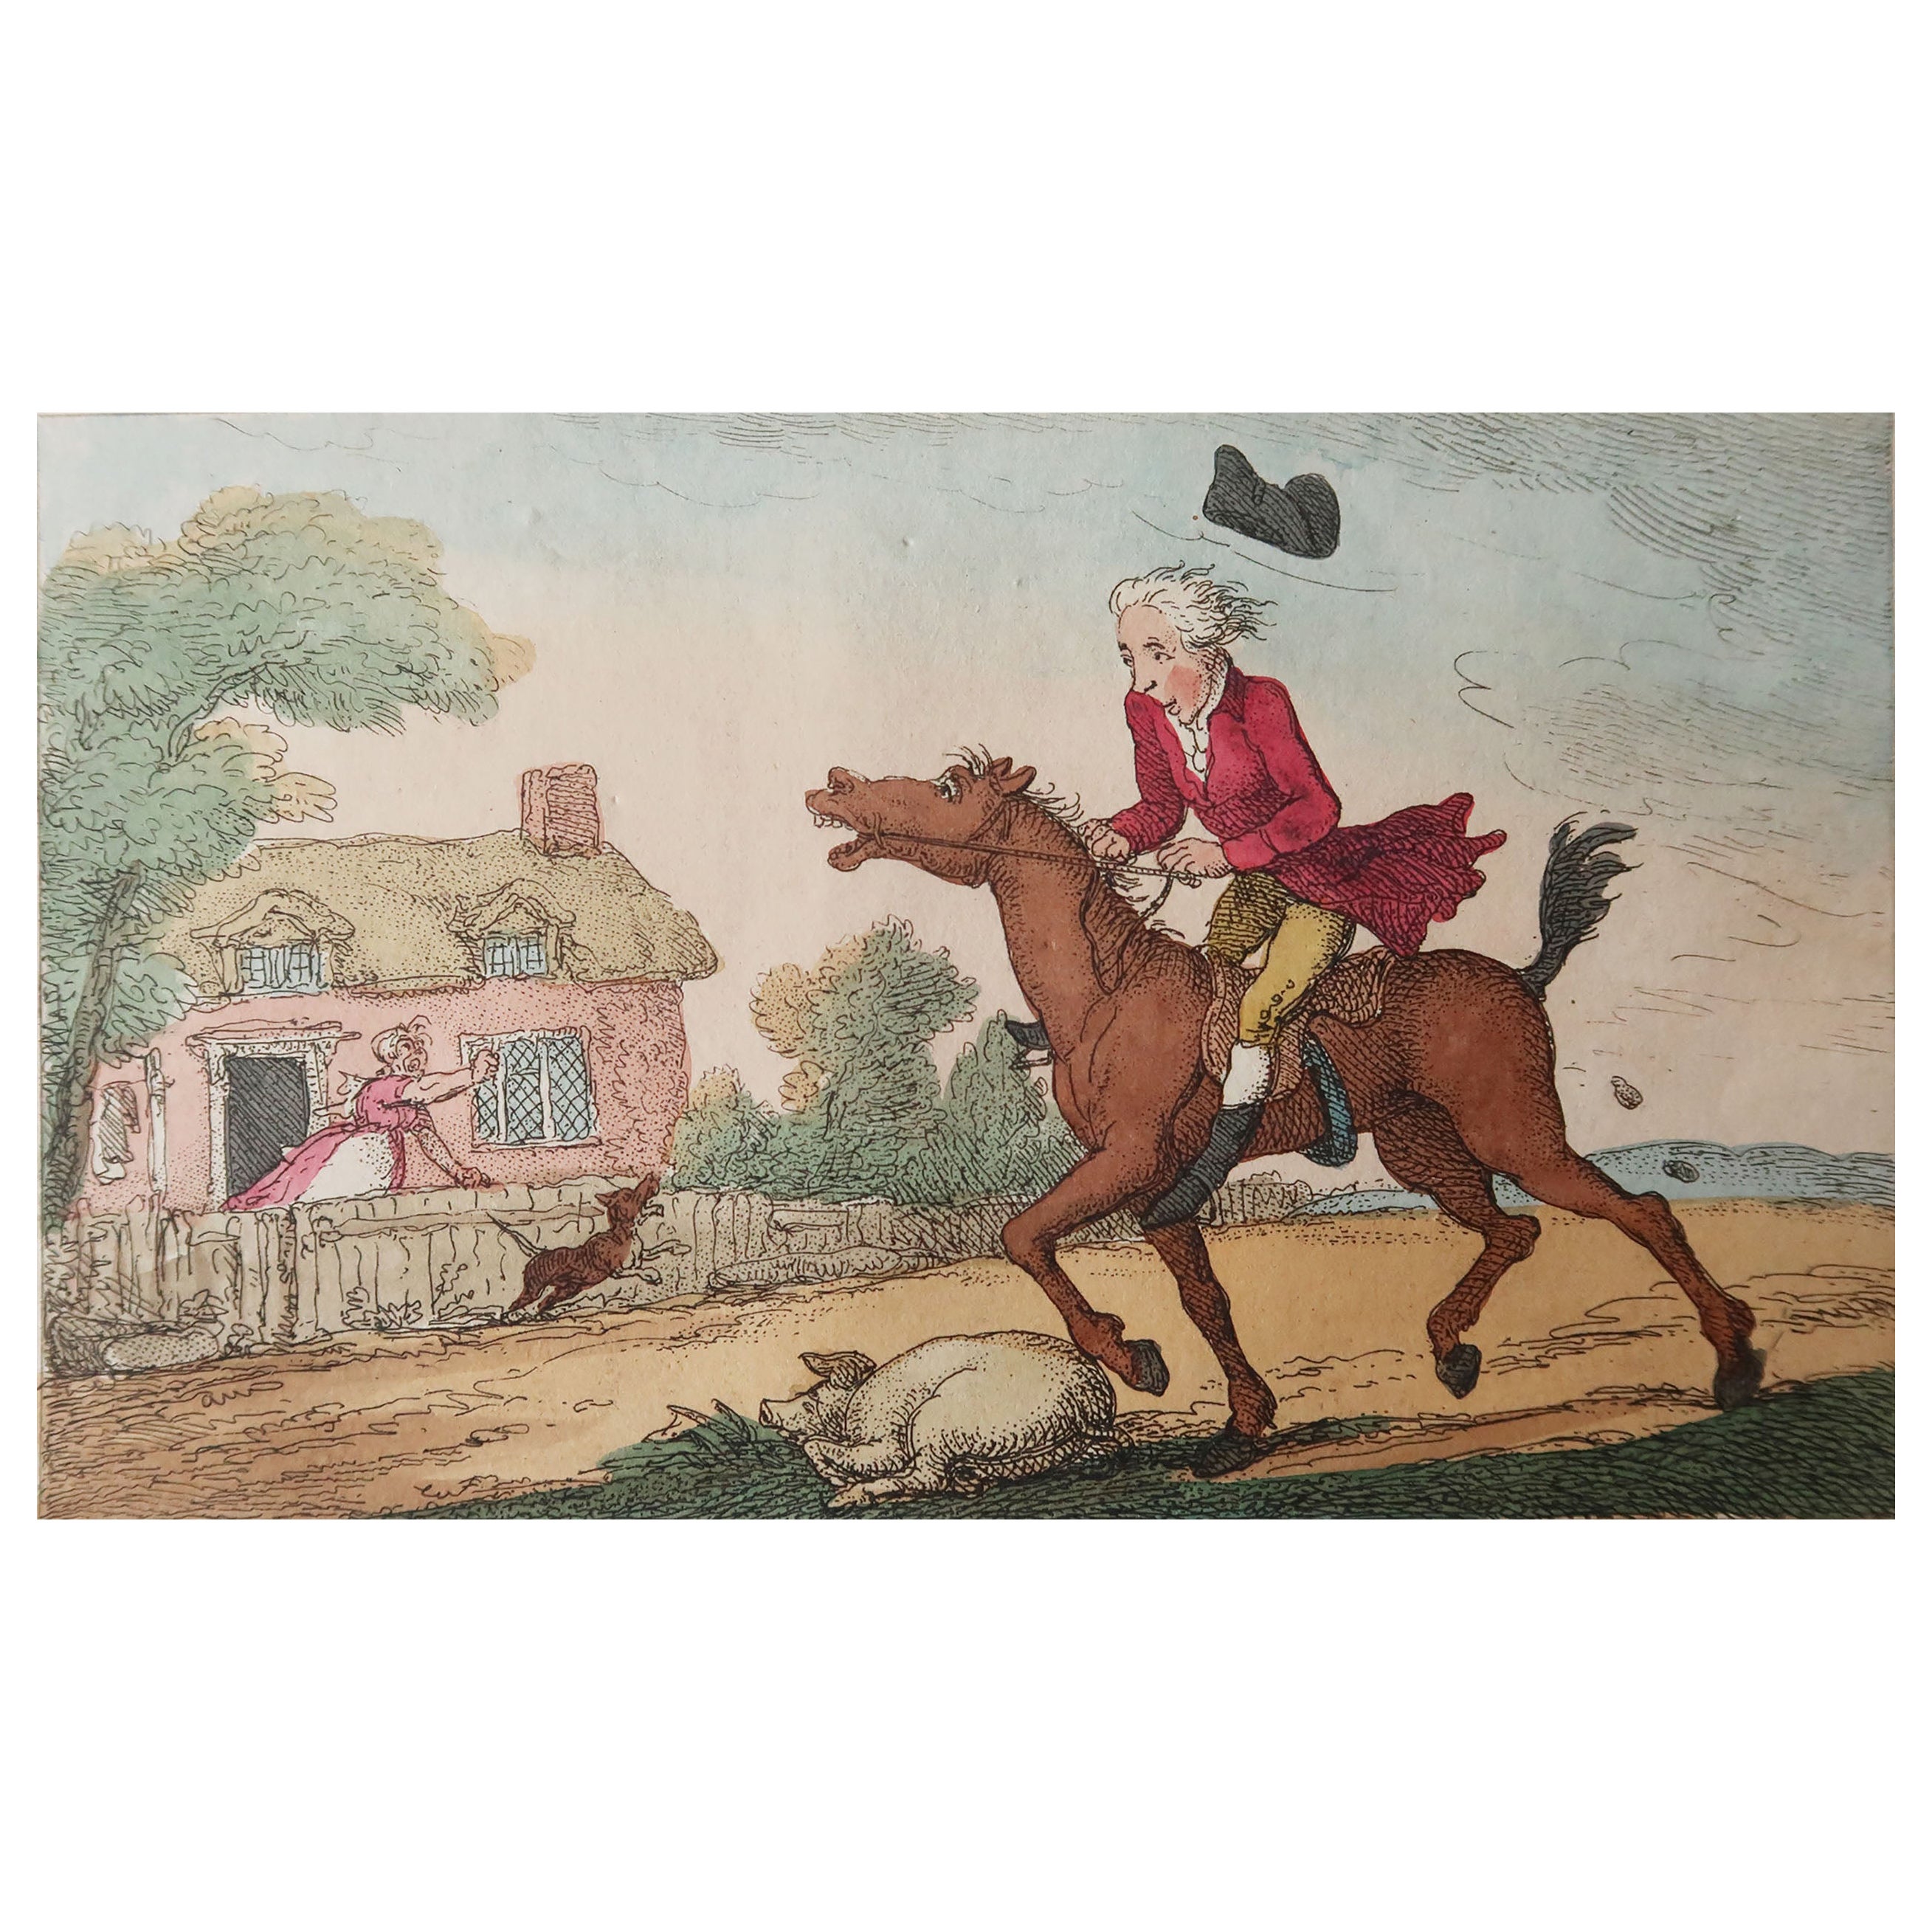 Original Antique Print After Thomas Rowlandson, Daisy Cutter. Dated 1808